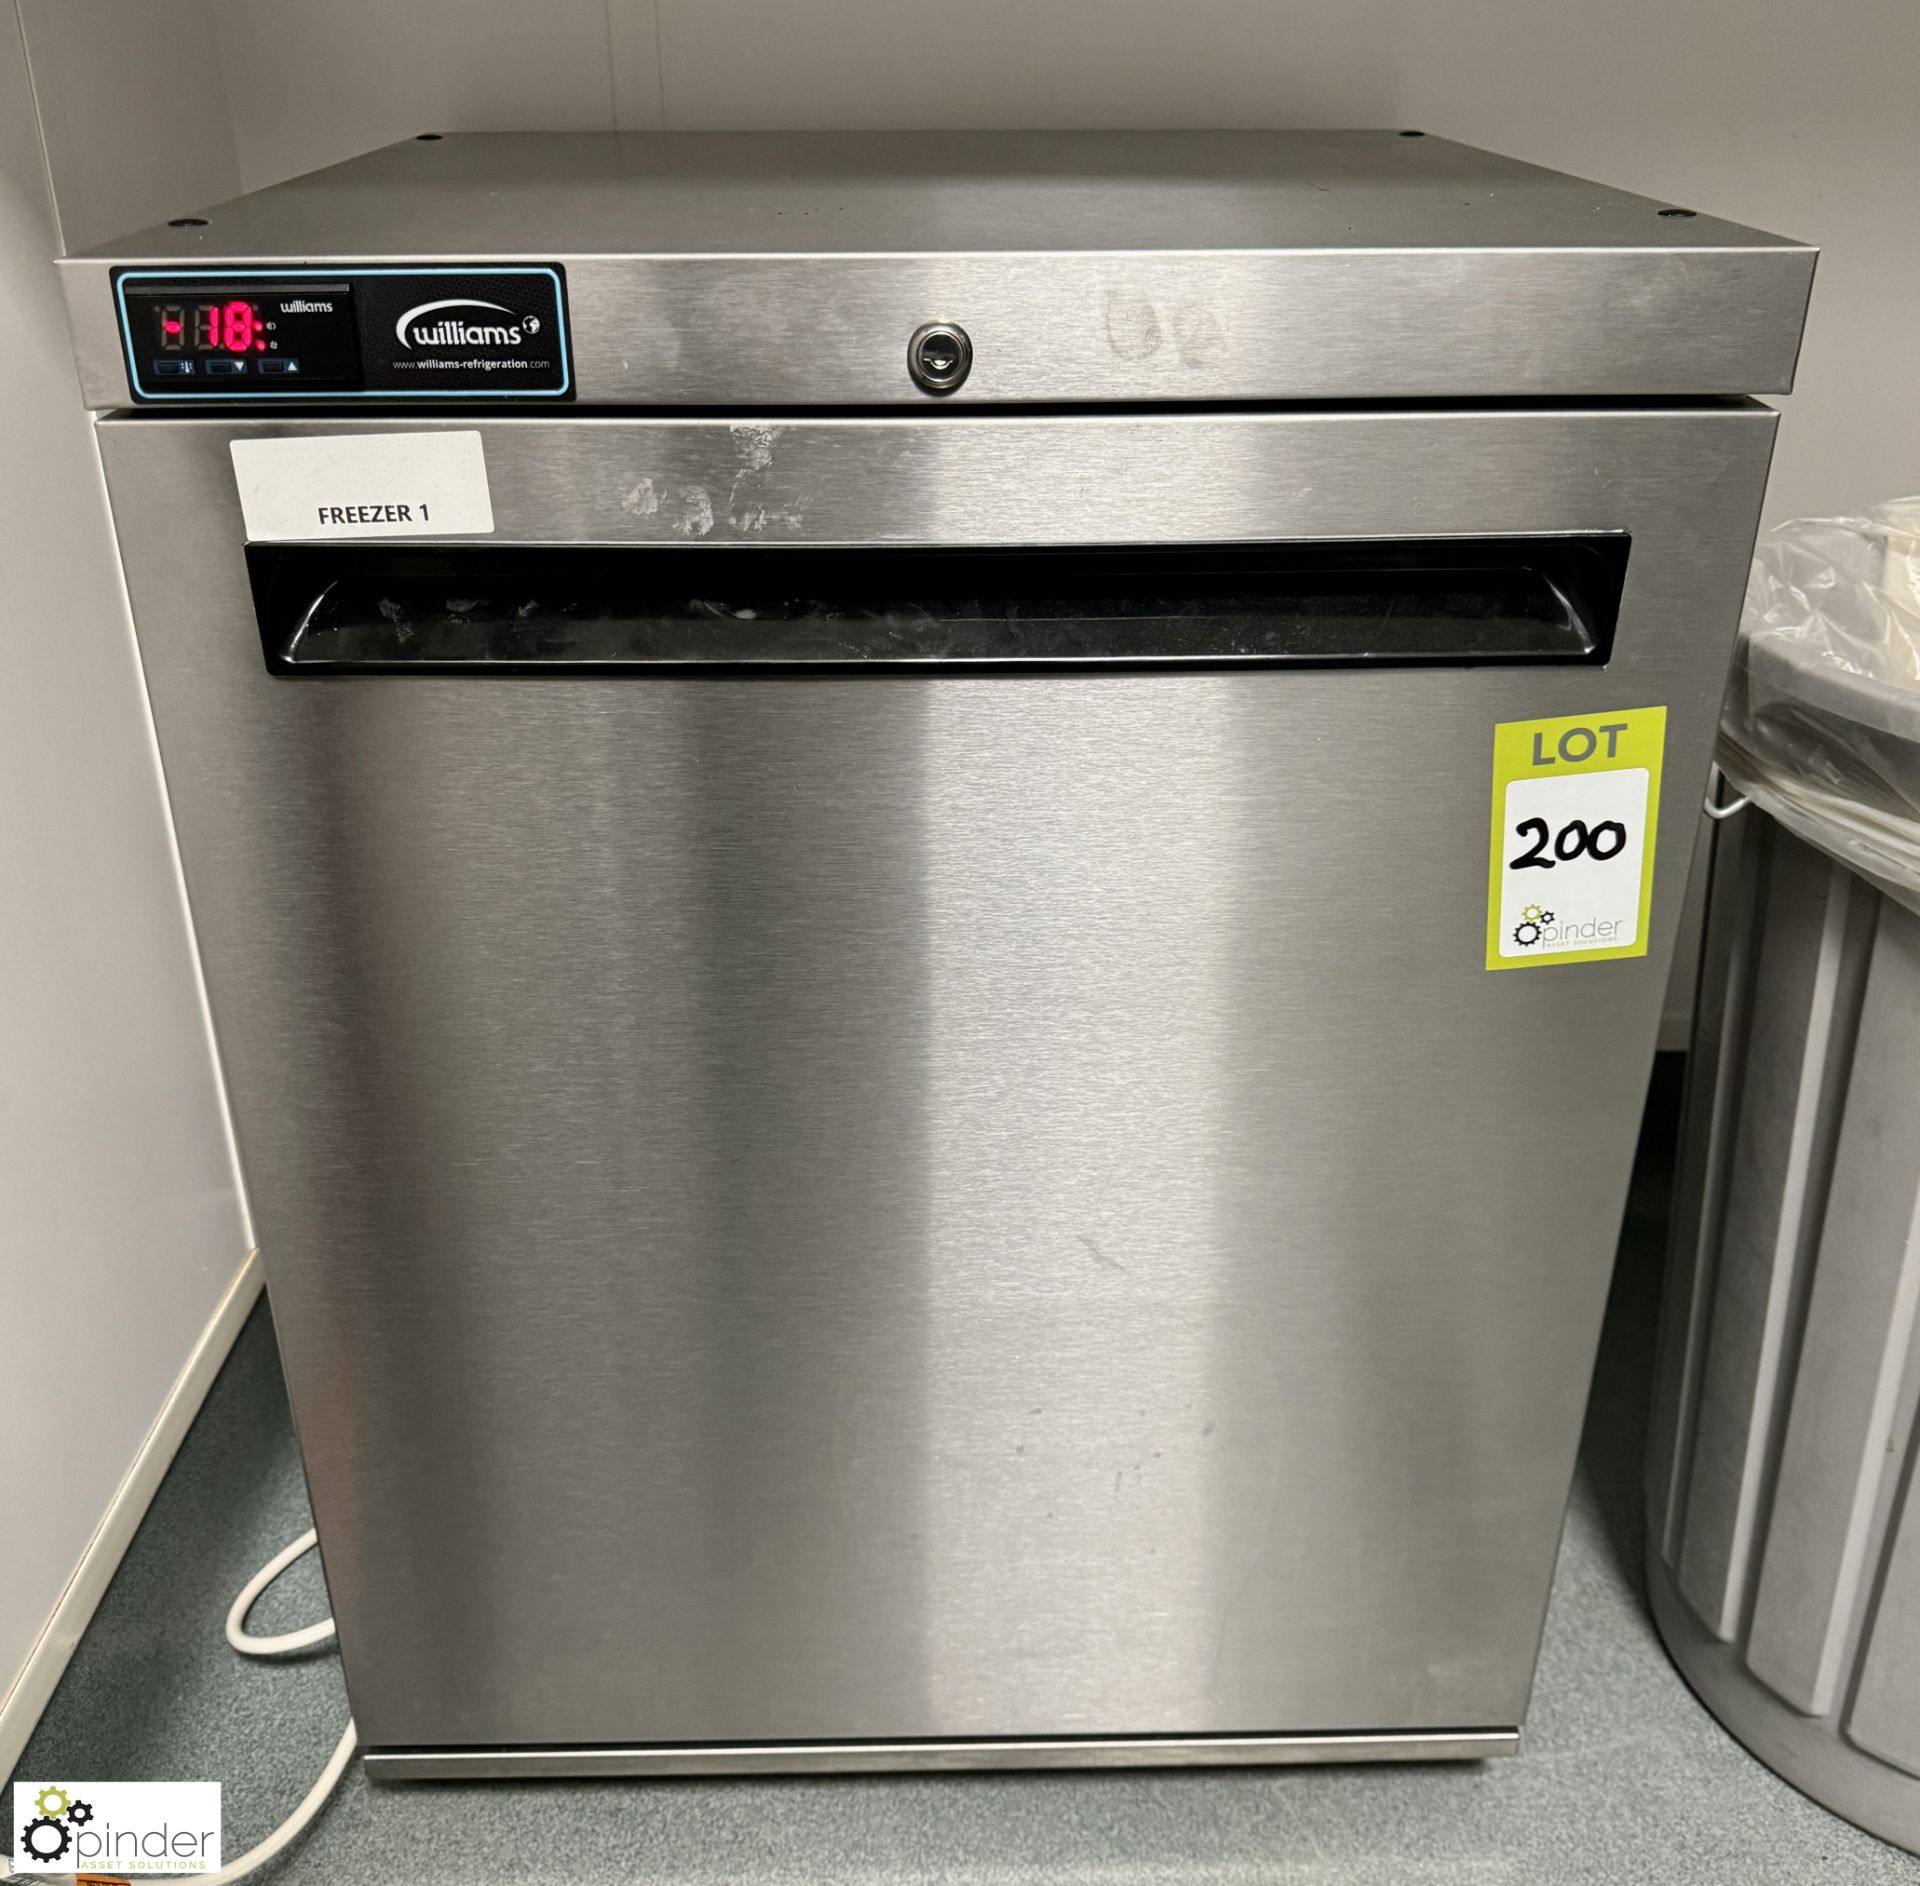 Williams LA135SAHGR3 stainless steel under counter Freezer, 240volts (location in building - level